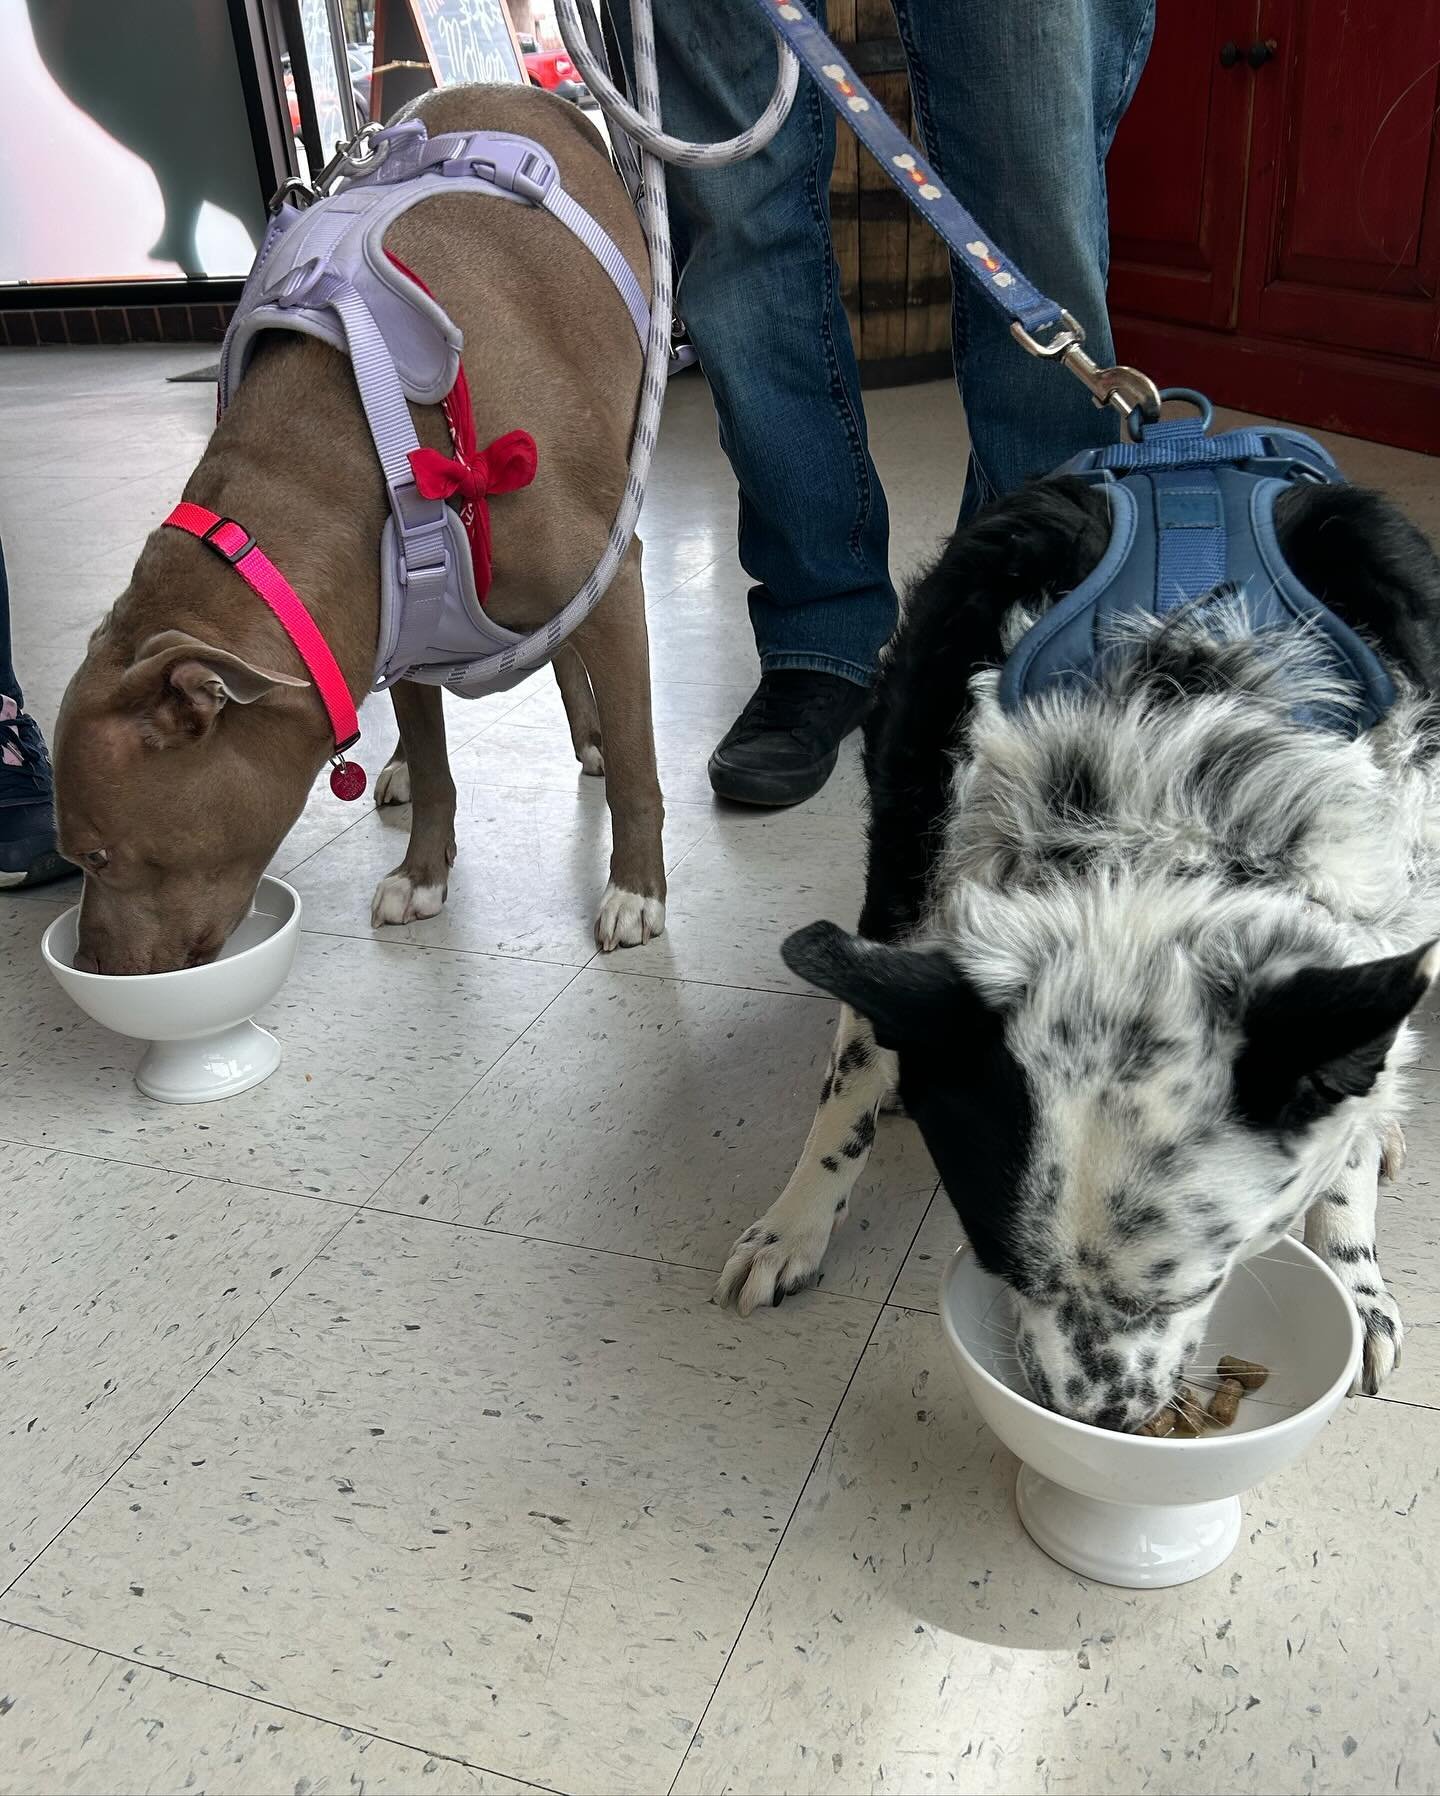 Pups love their free lattes &amp; oatmeals! We also have @frommfamily dog and cat kibble samples available today! 
😋 😋 😋 
#naturalpet #foco #smallbusiness